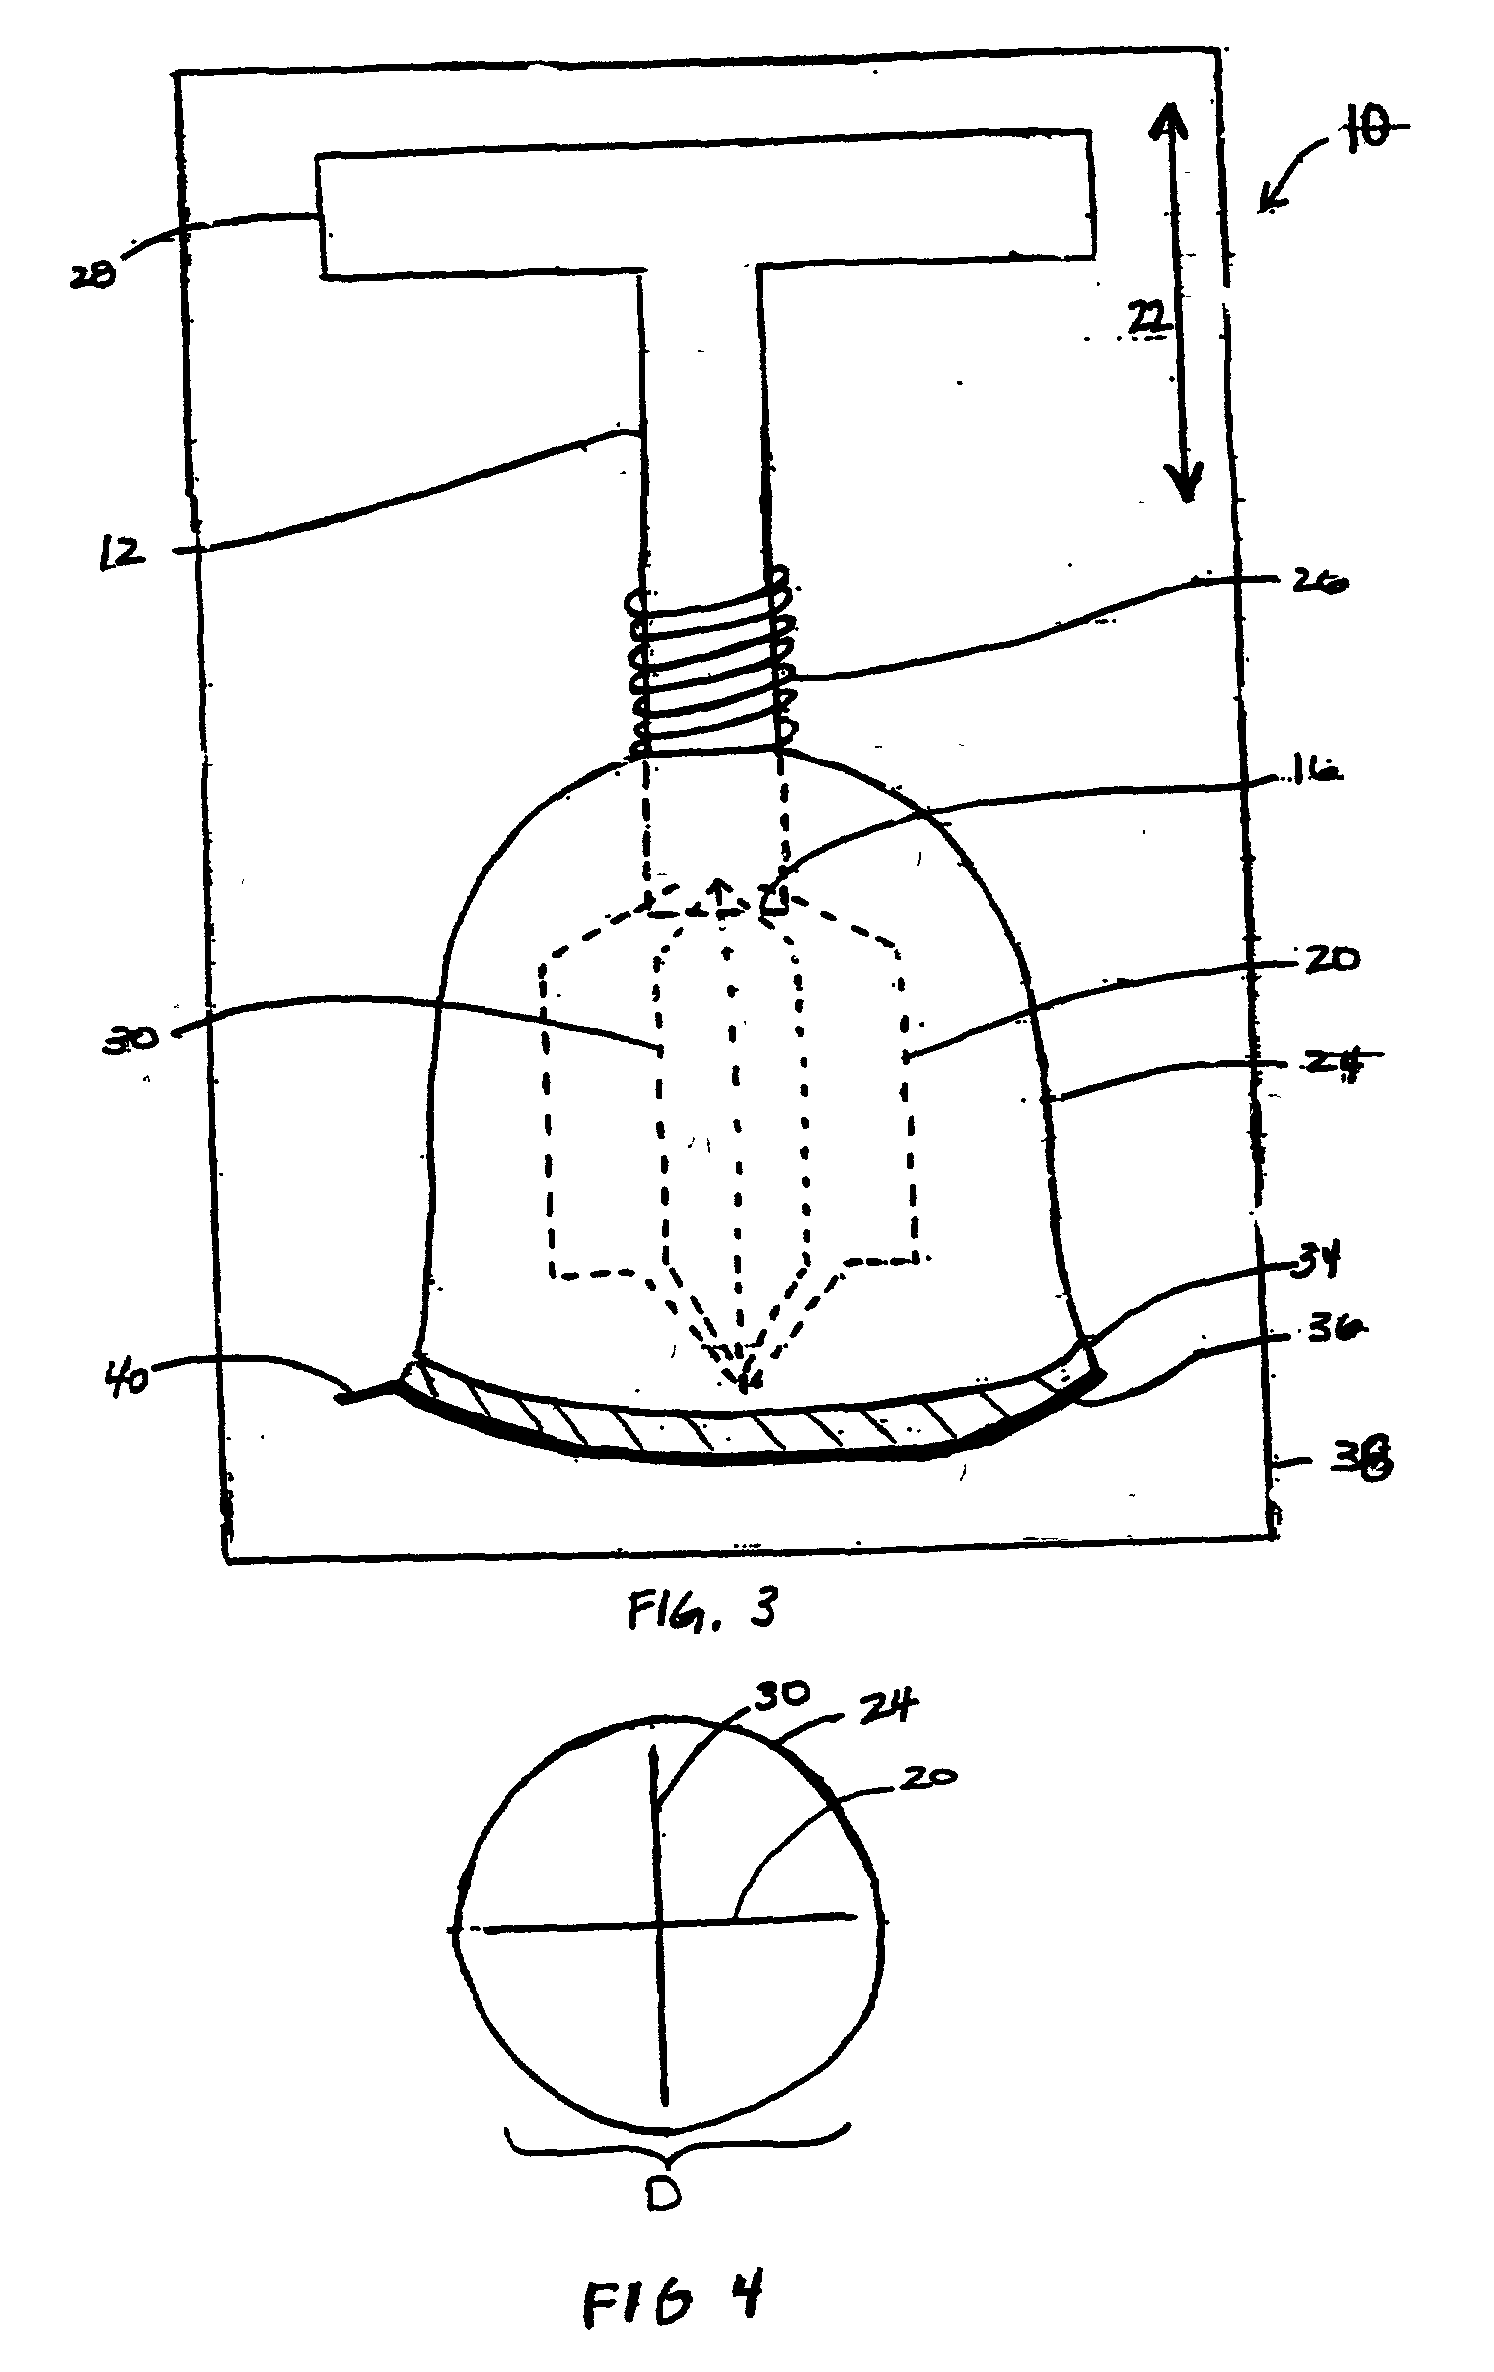 Methods and apparatus for intercostal access